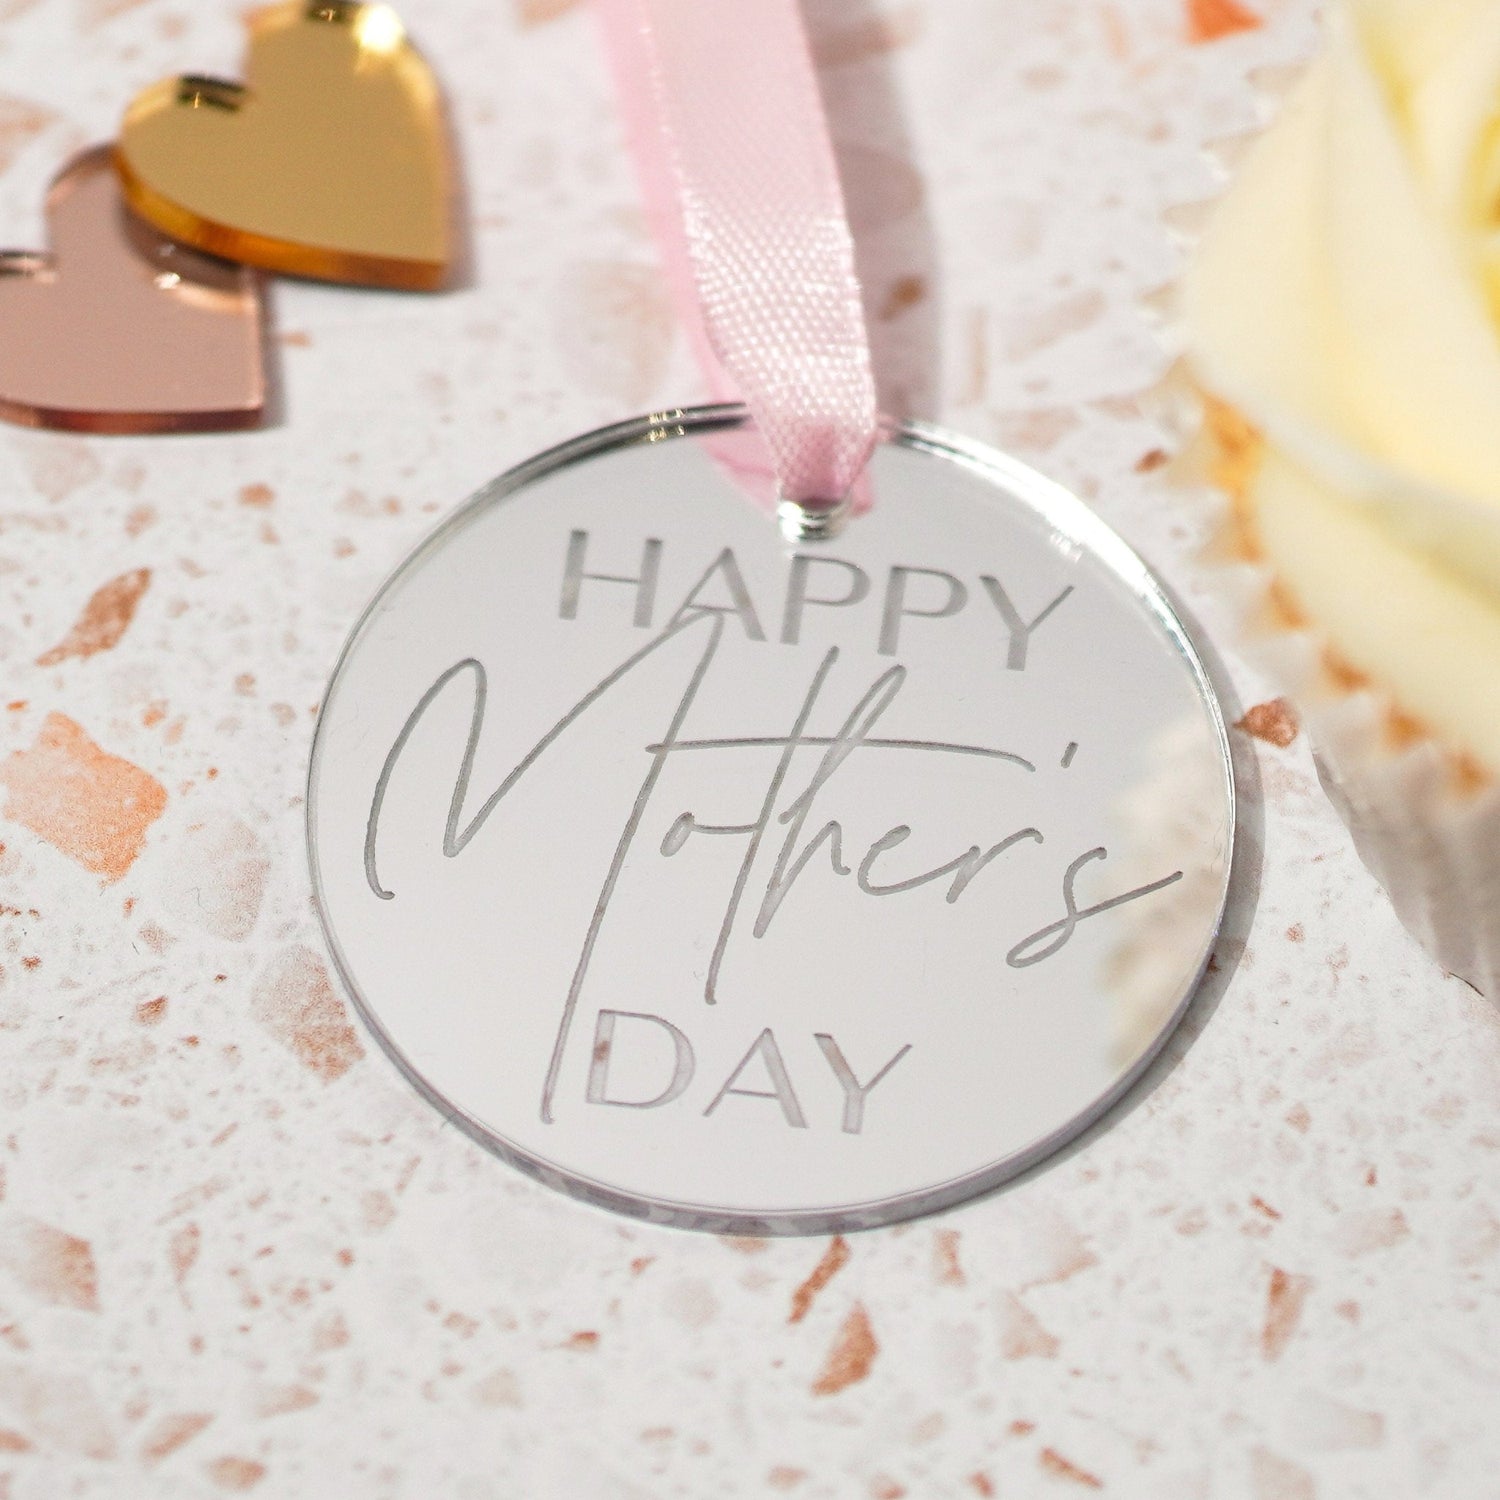 Happy Mothers Day gift tag